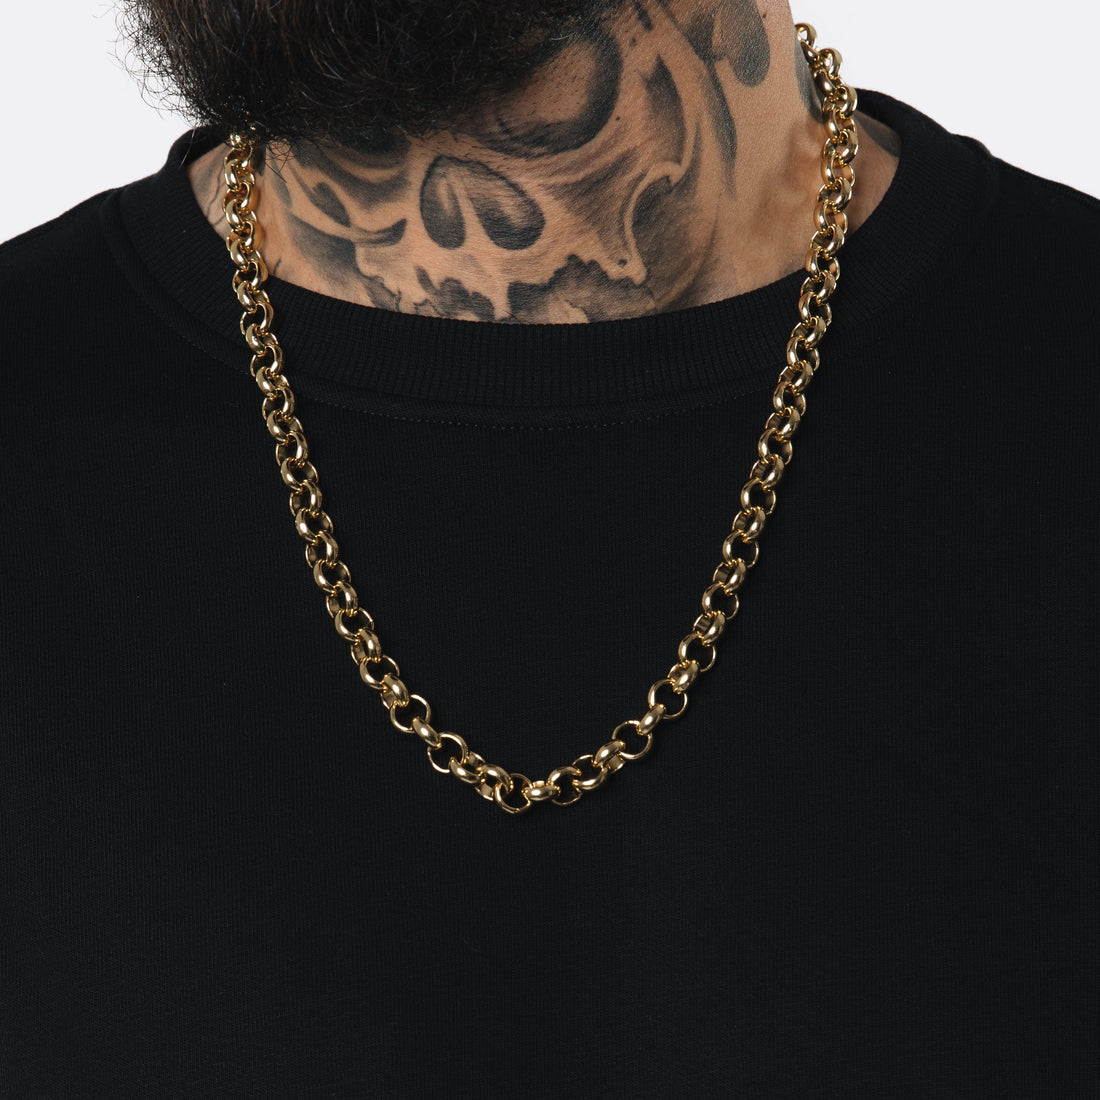 Close-up image of 10mm Gold Belcher Chain worn by model